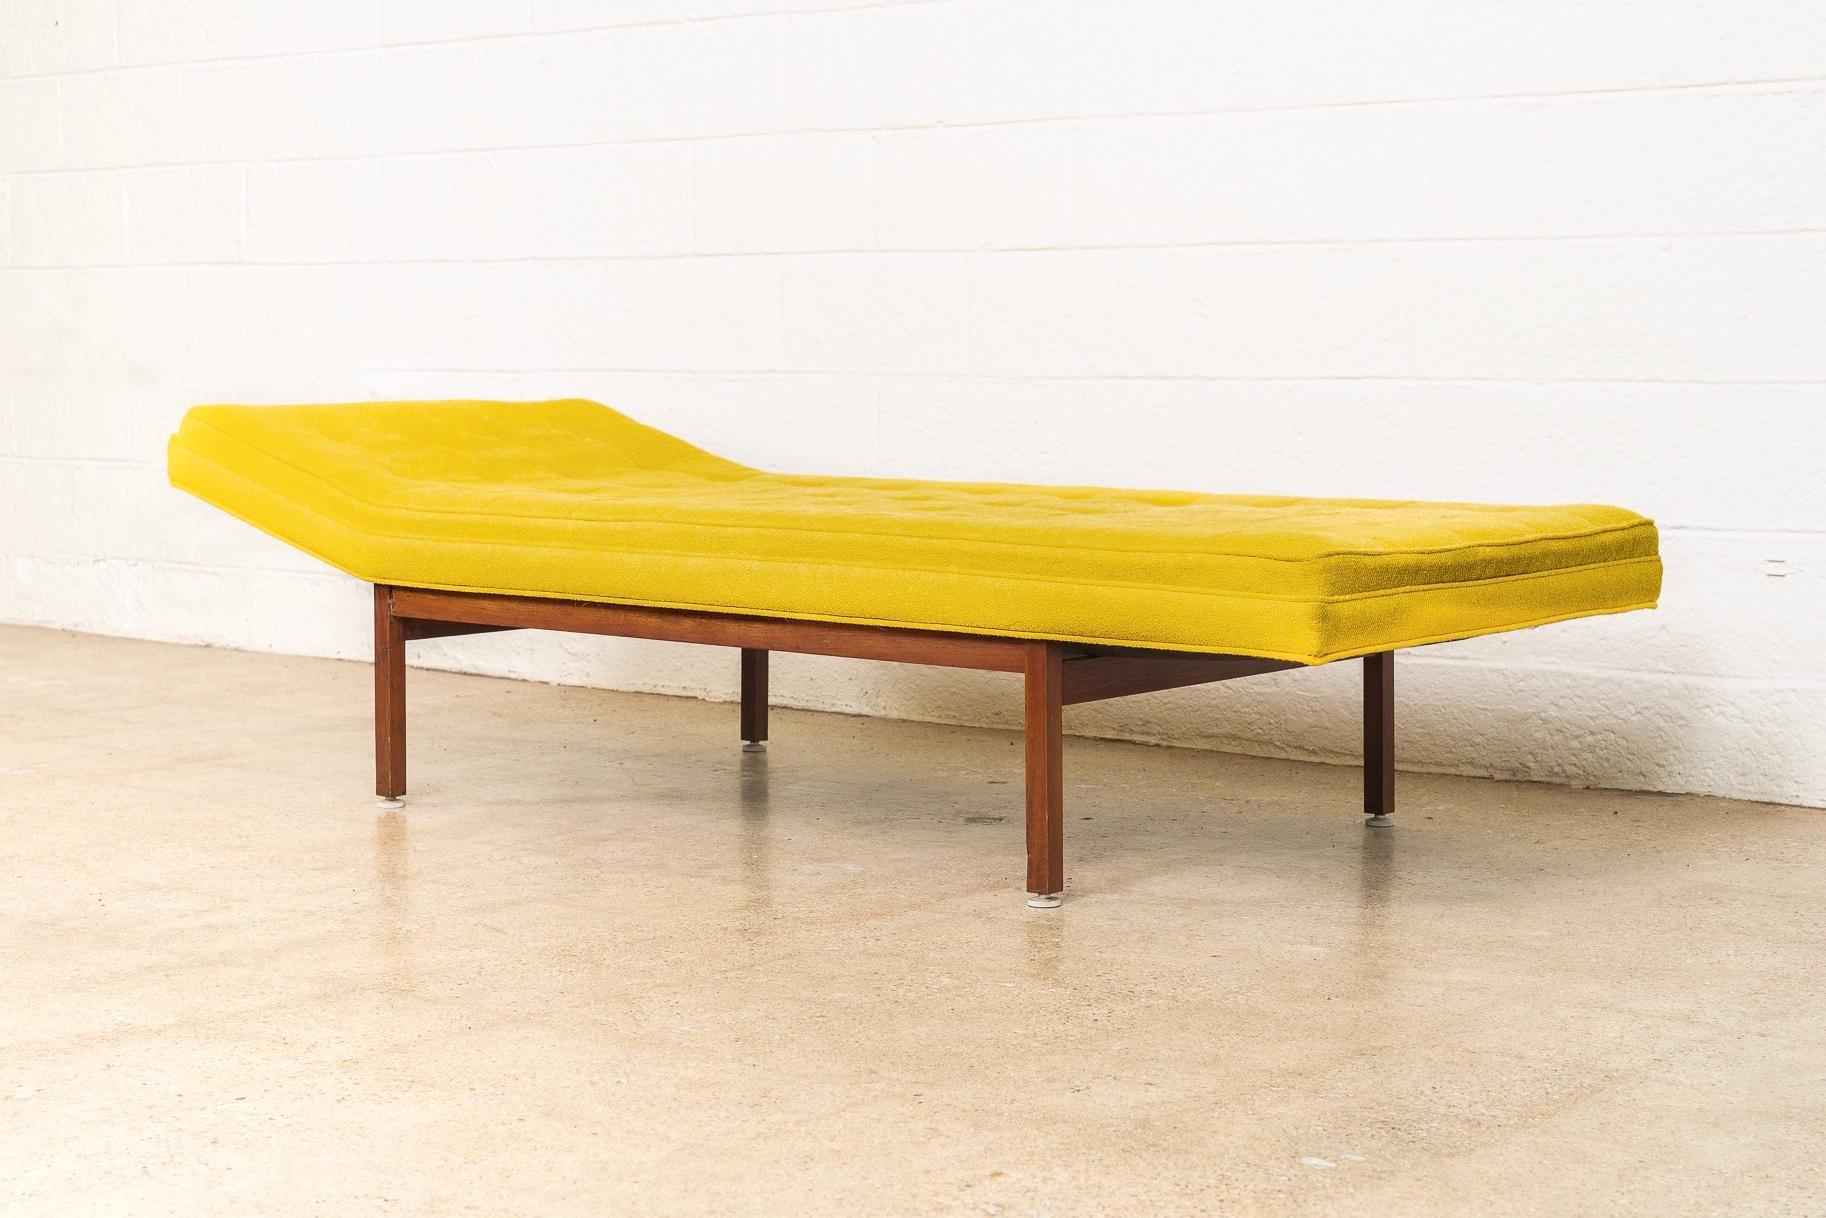 This incredible vintage daybed sofa in the style of George Nelson or Jens Risom is circa 1960. With Classic Mid-Century Modern styling, this unique piece features clean lines and a low profile with a gently angled headrest. The sofa was